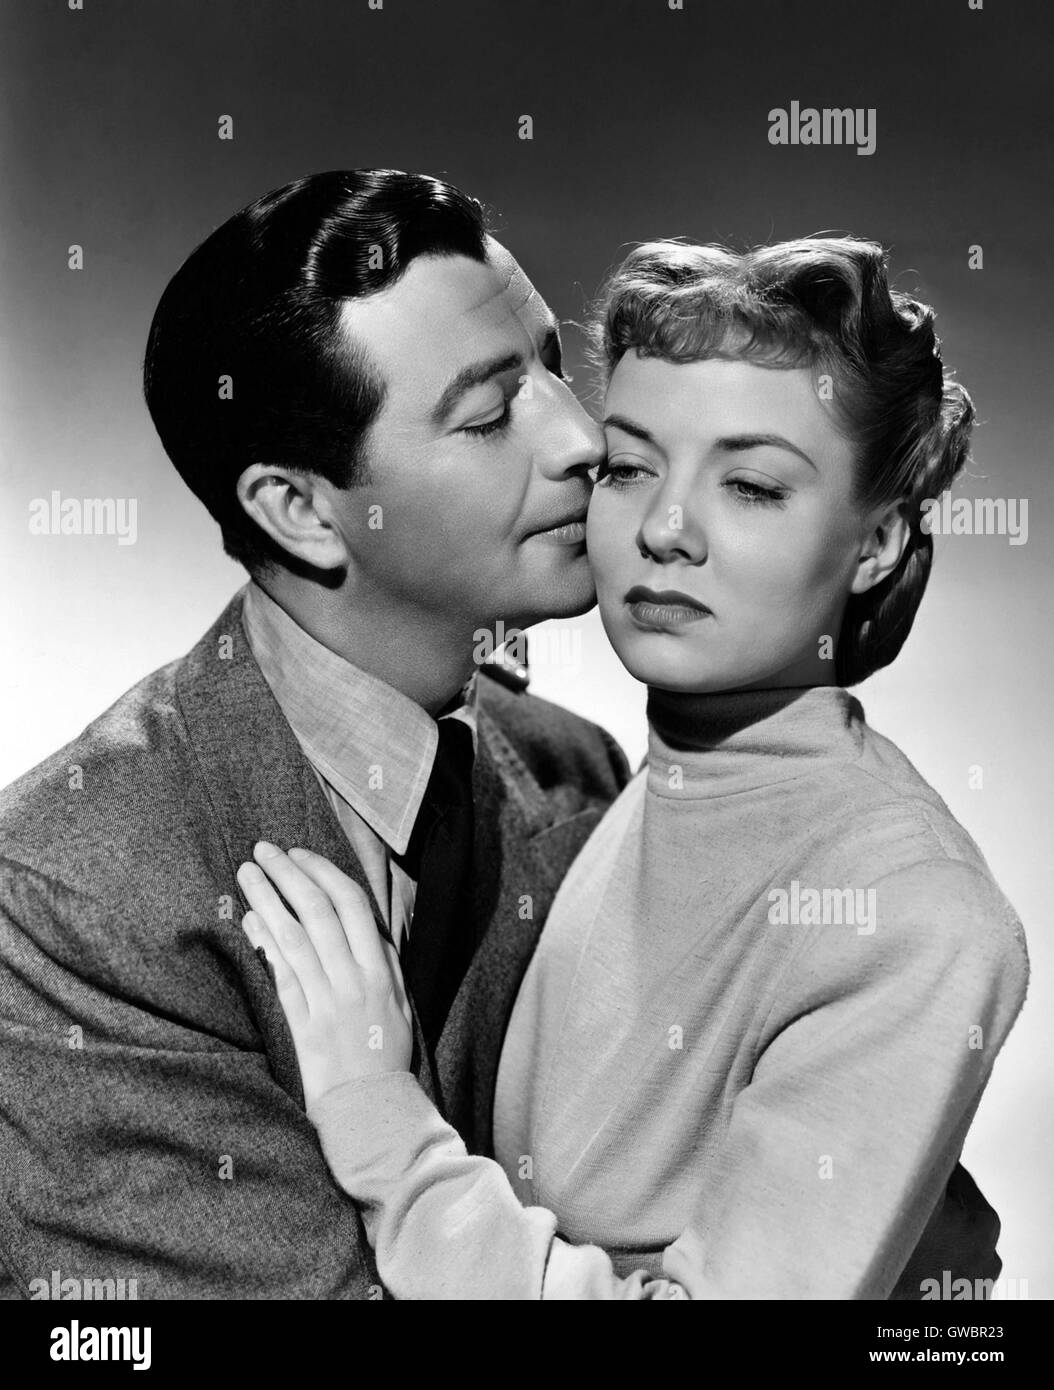 HOHE Wand 1947 MGM Film mit Audrey Totter und Robert Taylor Stockfoto